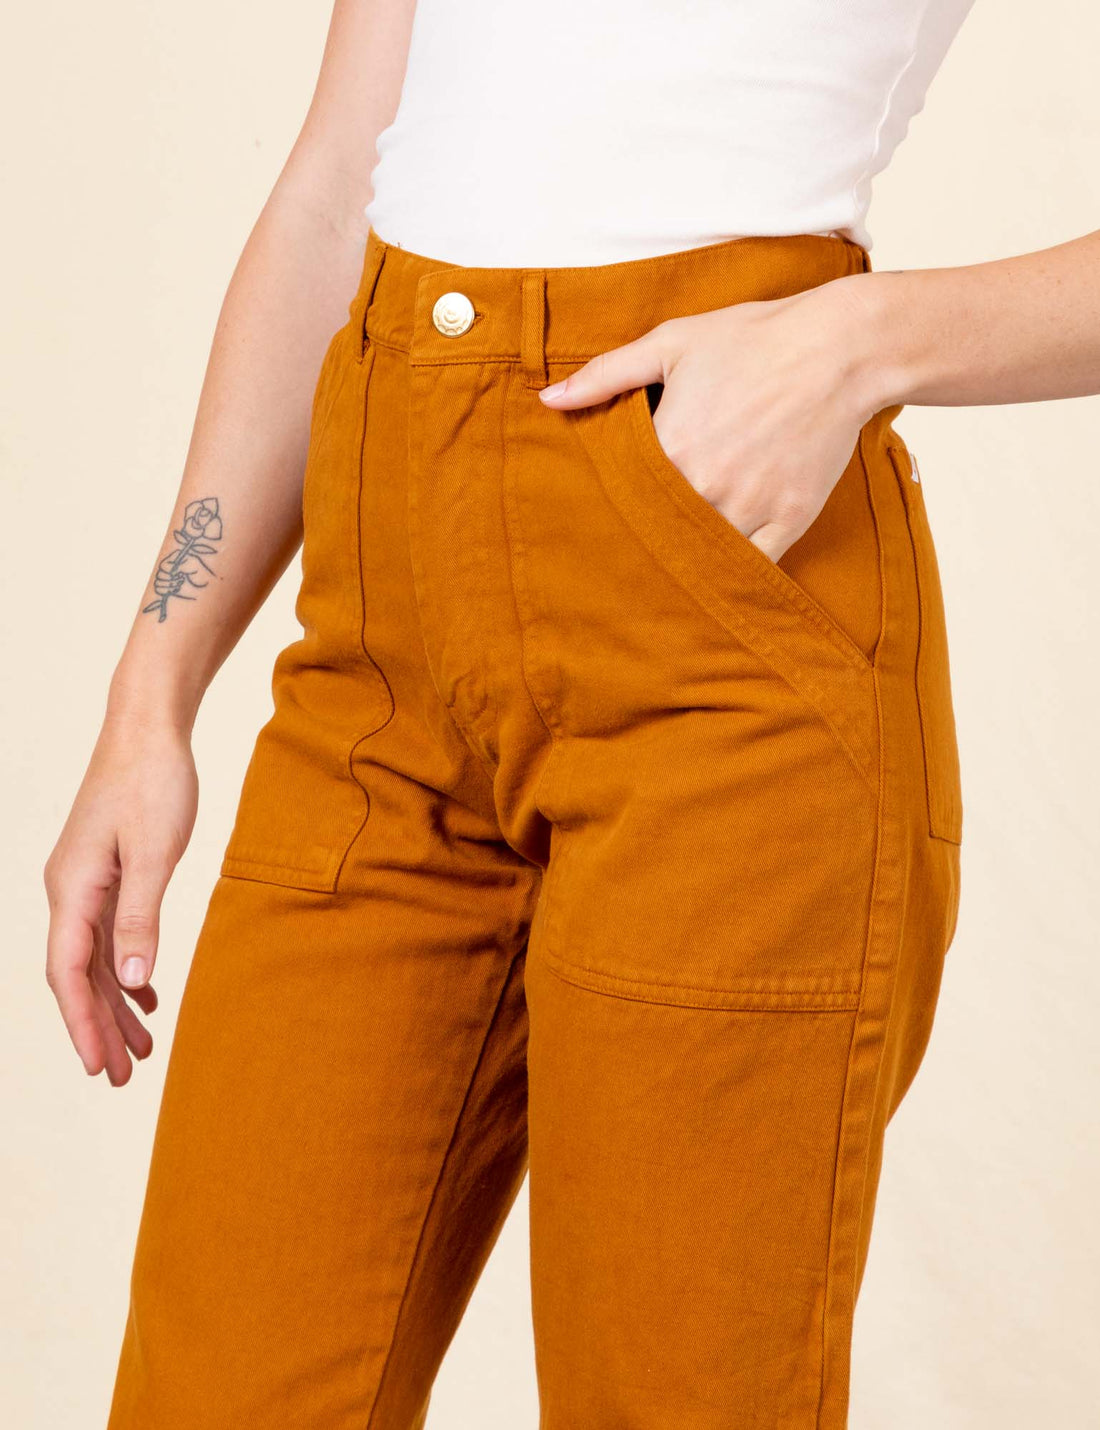 Work Pants in Spicy Mustard close up with hand in pocket